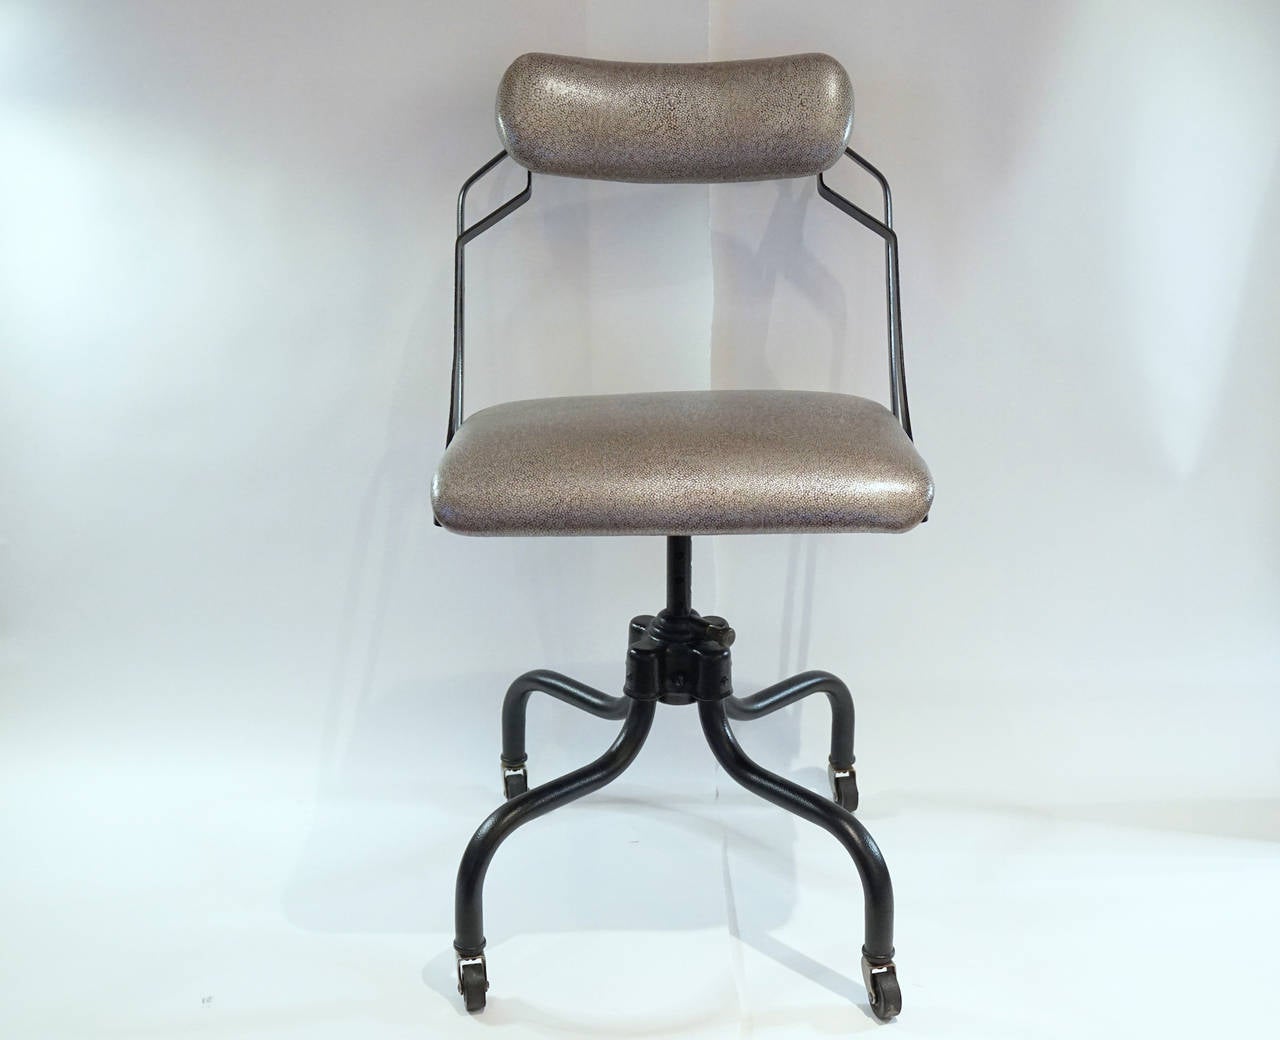 Fabulous stenographers chair by Reminton-Rand Sitwel.Interesting early ergonomic design with multiple adjustments. Powder coated fram and new Edleman faux shagreen leather upholstery.